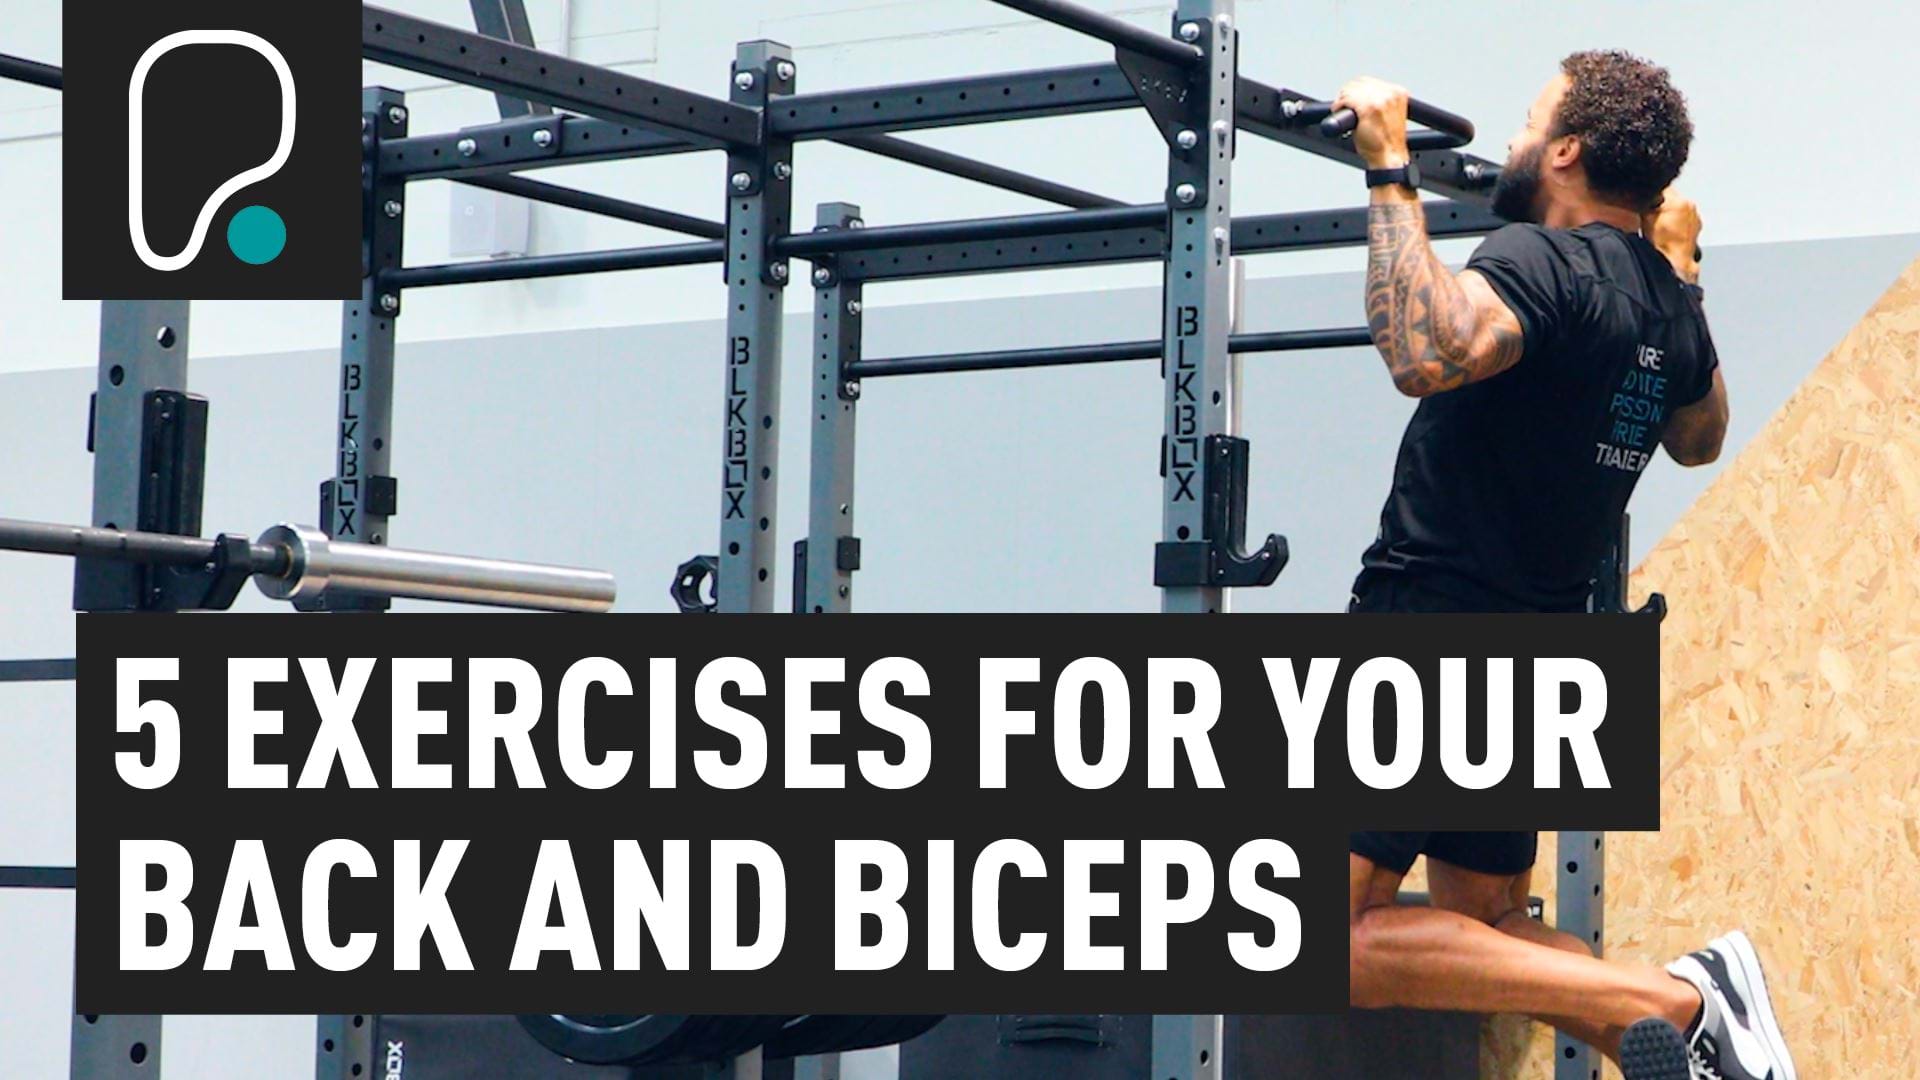 Best Arm Workouts & Exercises for Building Strength